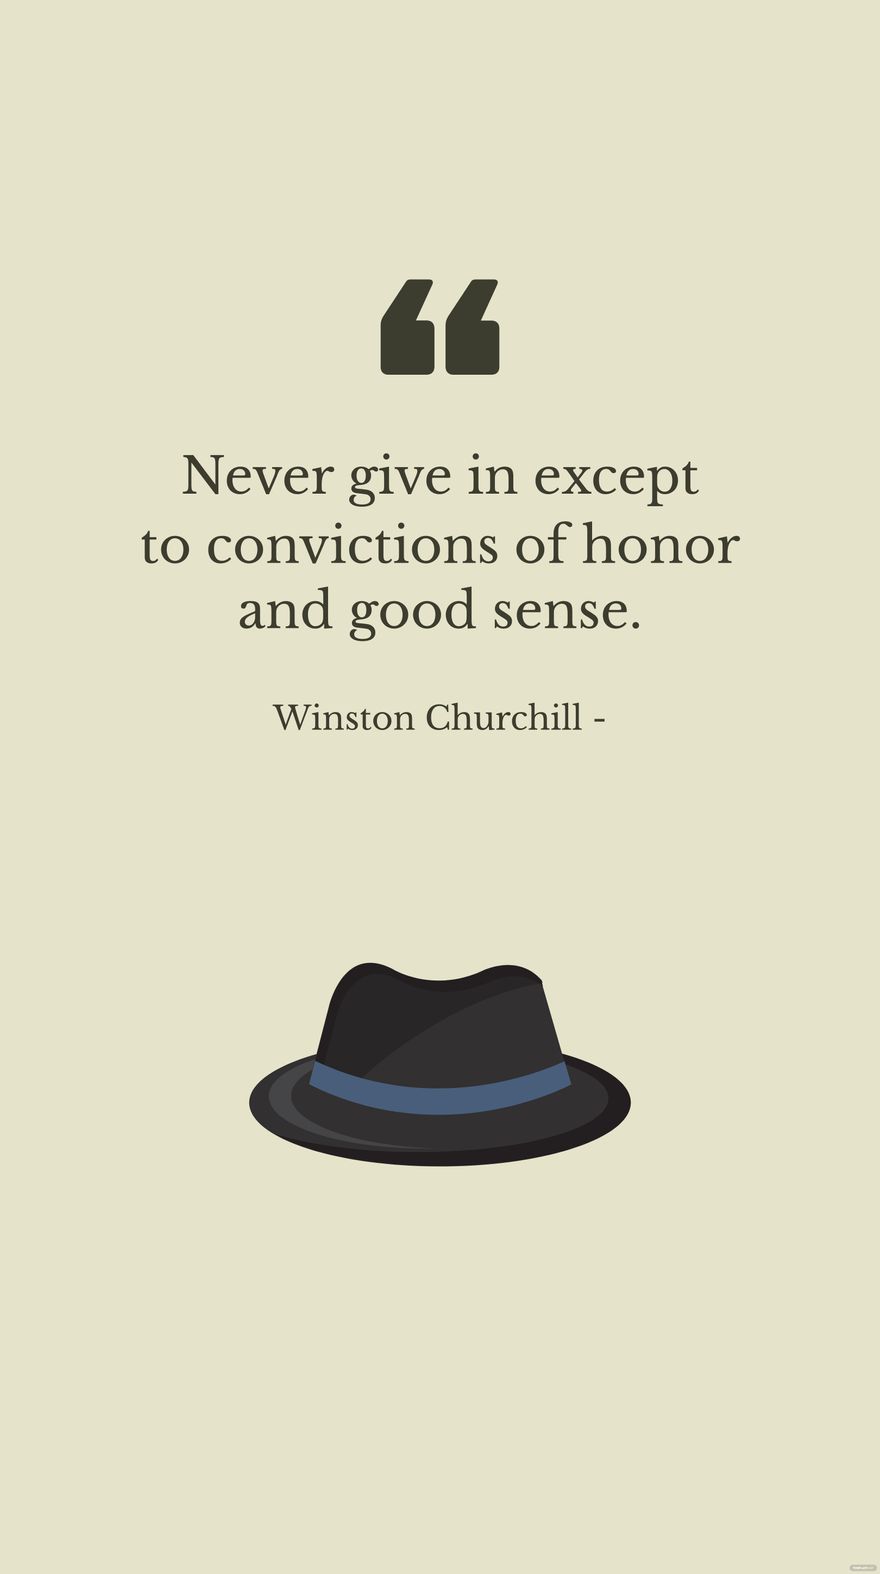 Free Winston Churchill - Never give in except to convictions of honor and good sense.